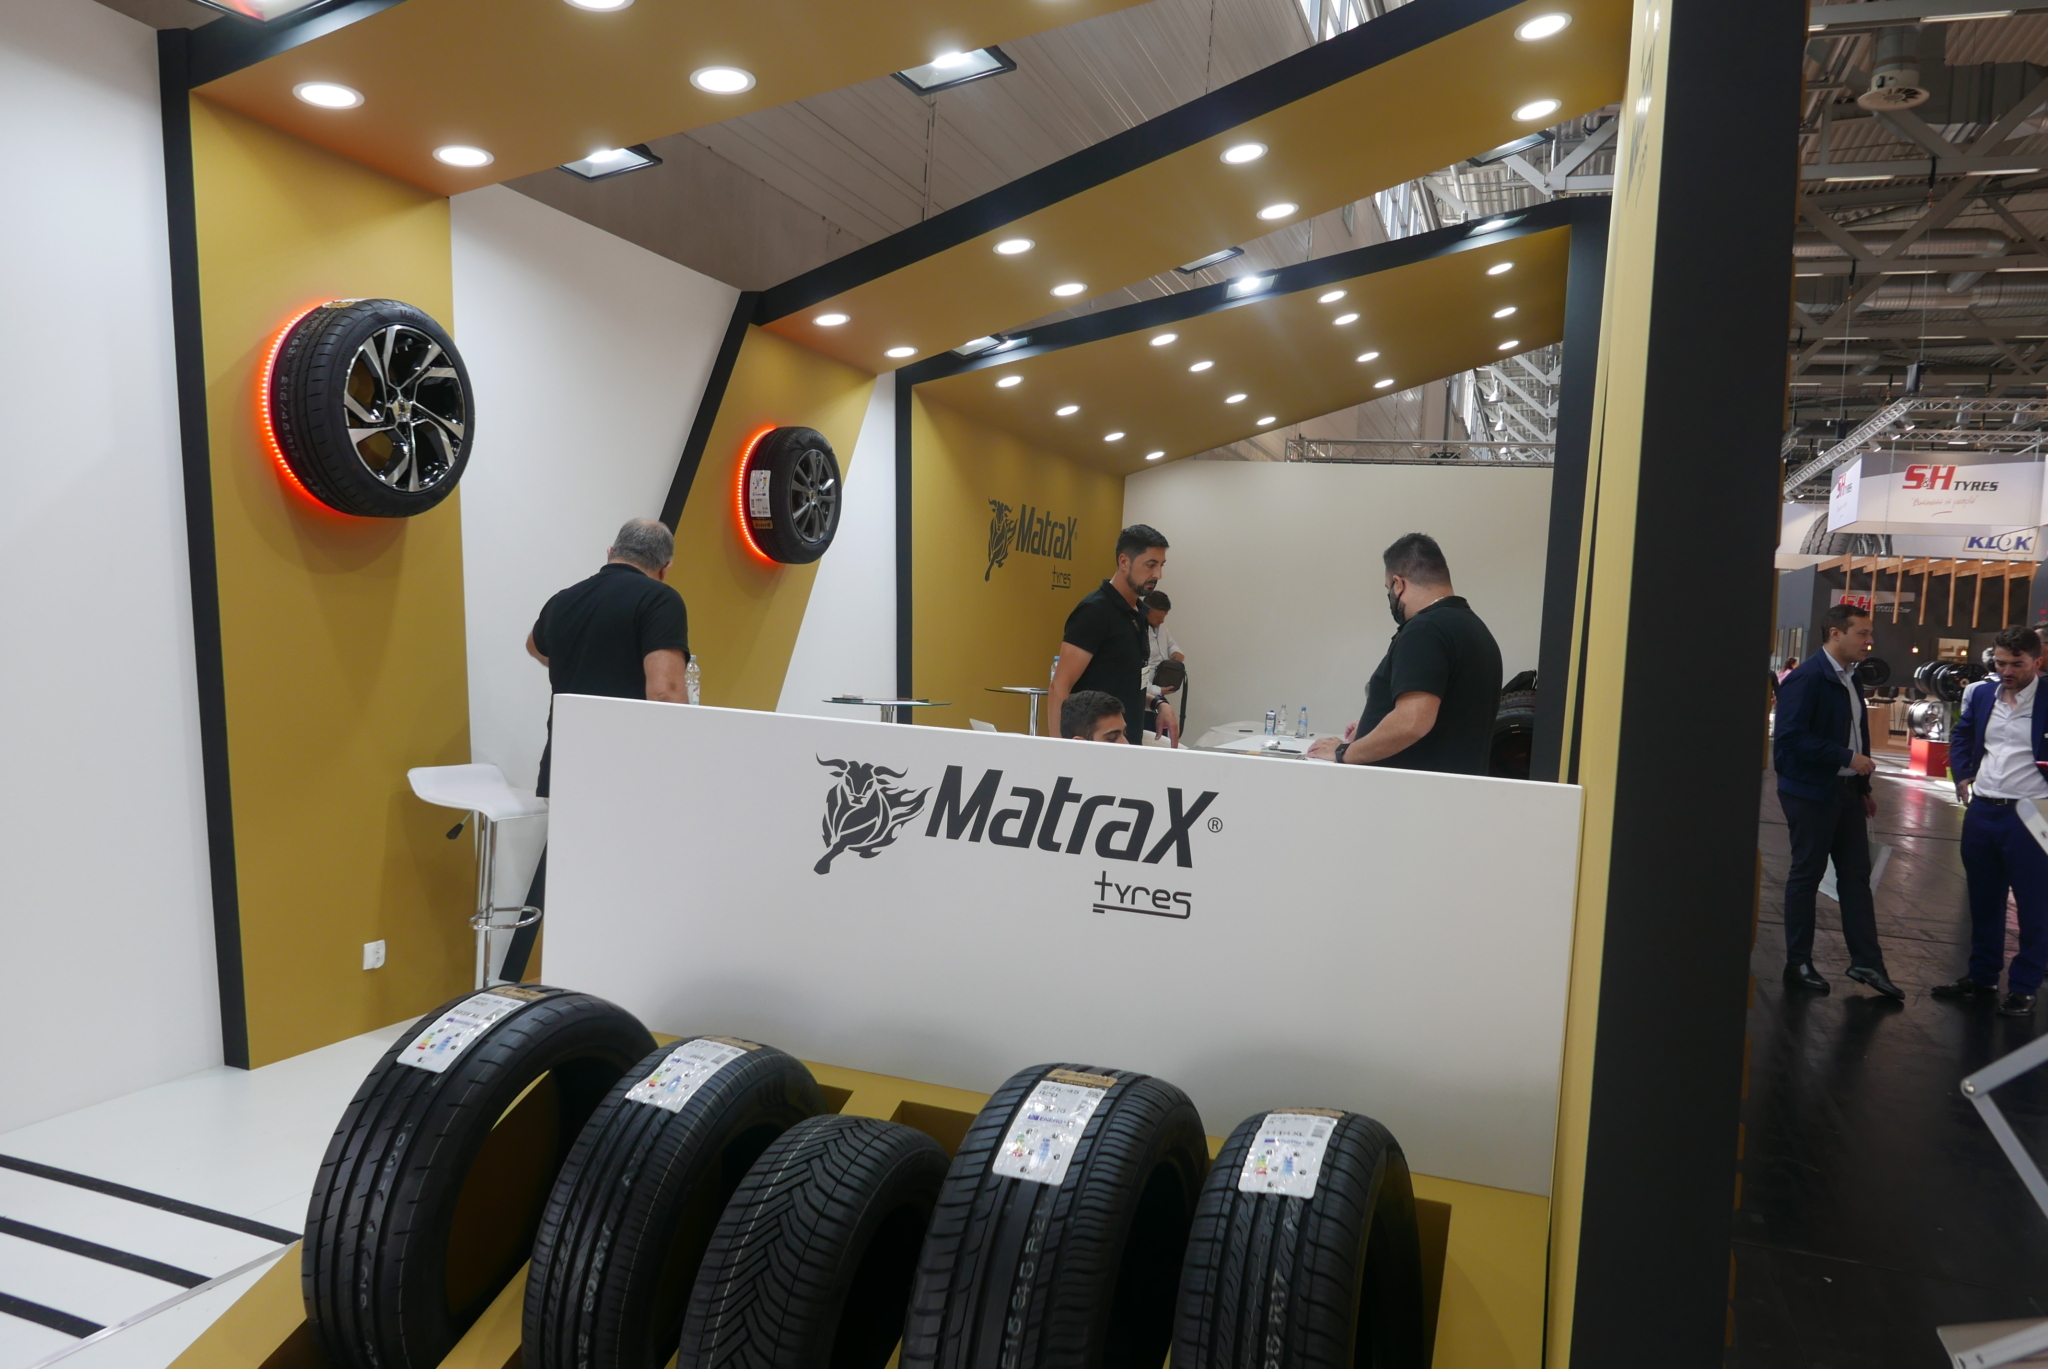 Grupo Alves Bandeira aims to take Matrax up a gear after Tire Cologne